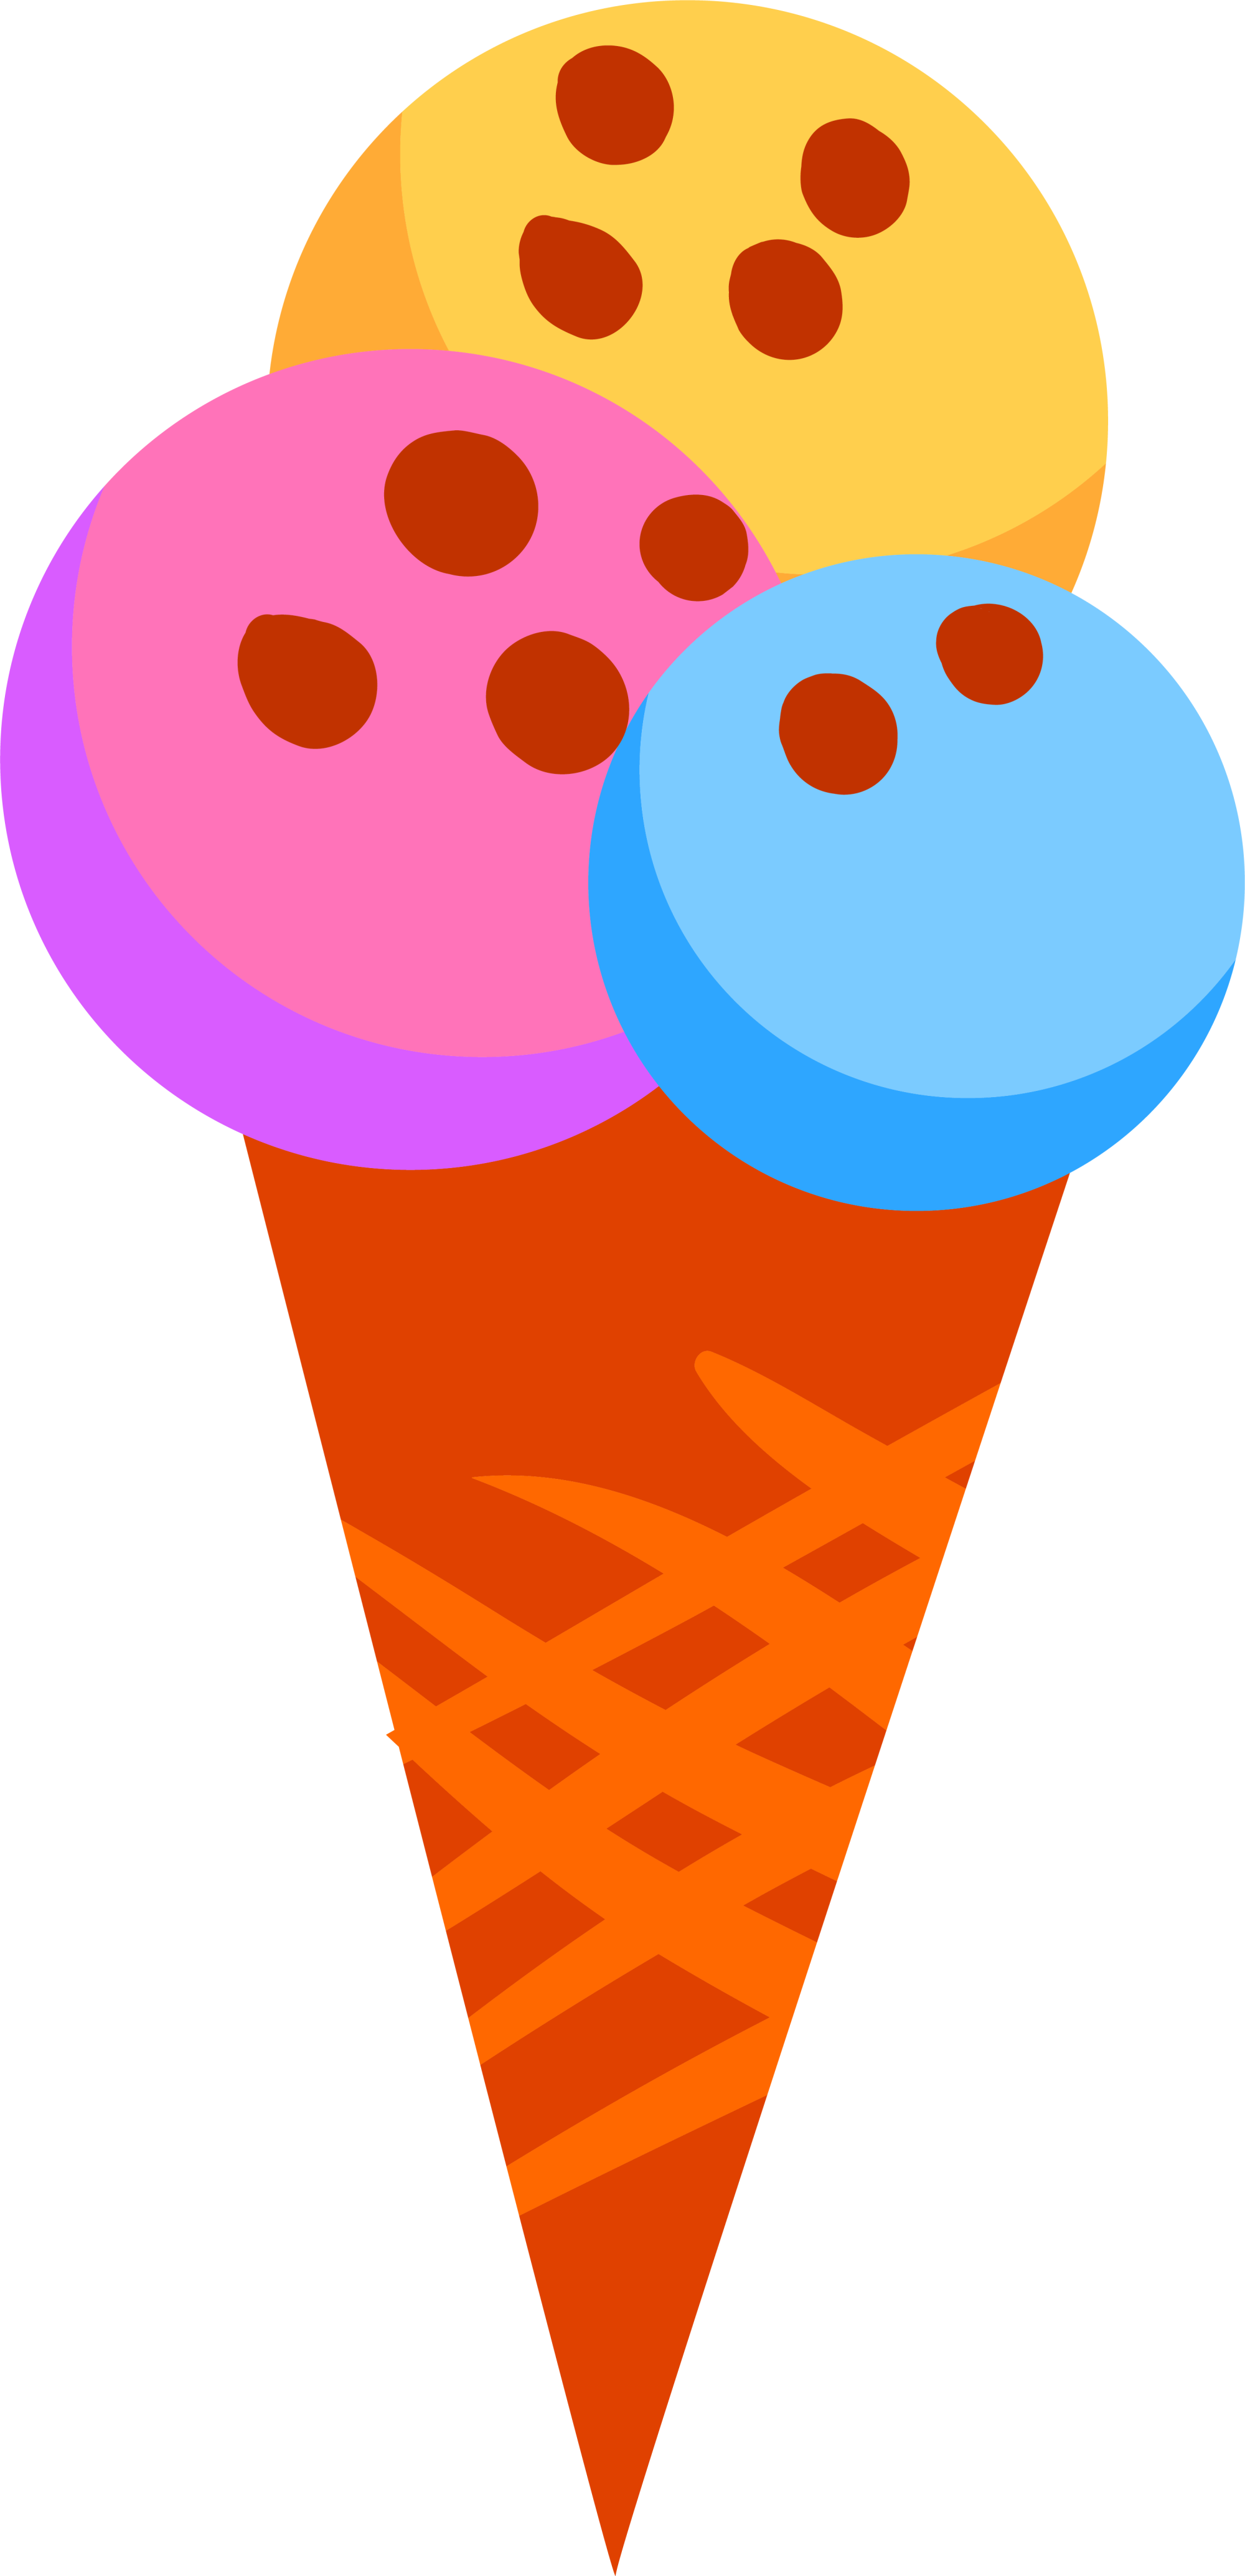 Ice cream PNG image transparent image download, size: 1979x3066px